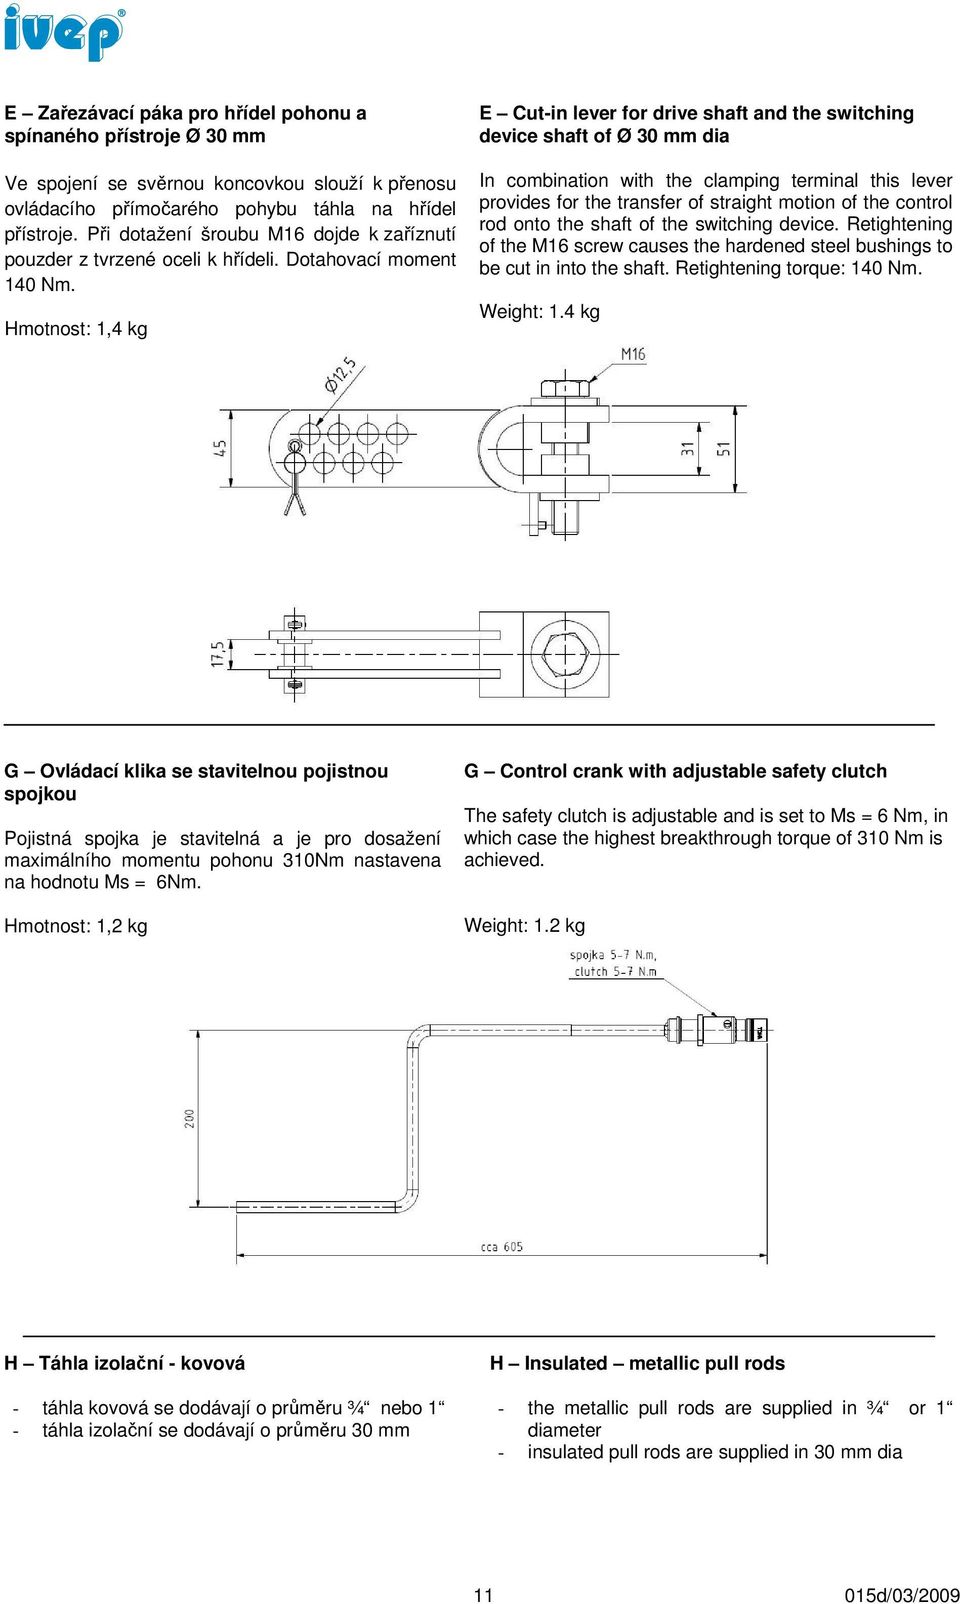 Hmotnost: 1,4 kg E Cut-in lever for drive shaft and the switching device shaft of Ø 30 mm dia In combination with the clamping terminal this lever provides for the transfer of straight motion of the